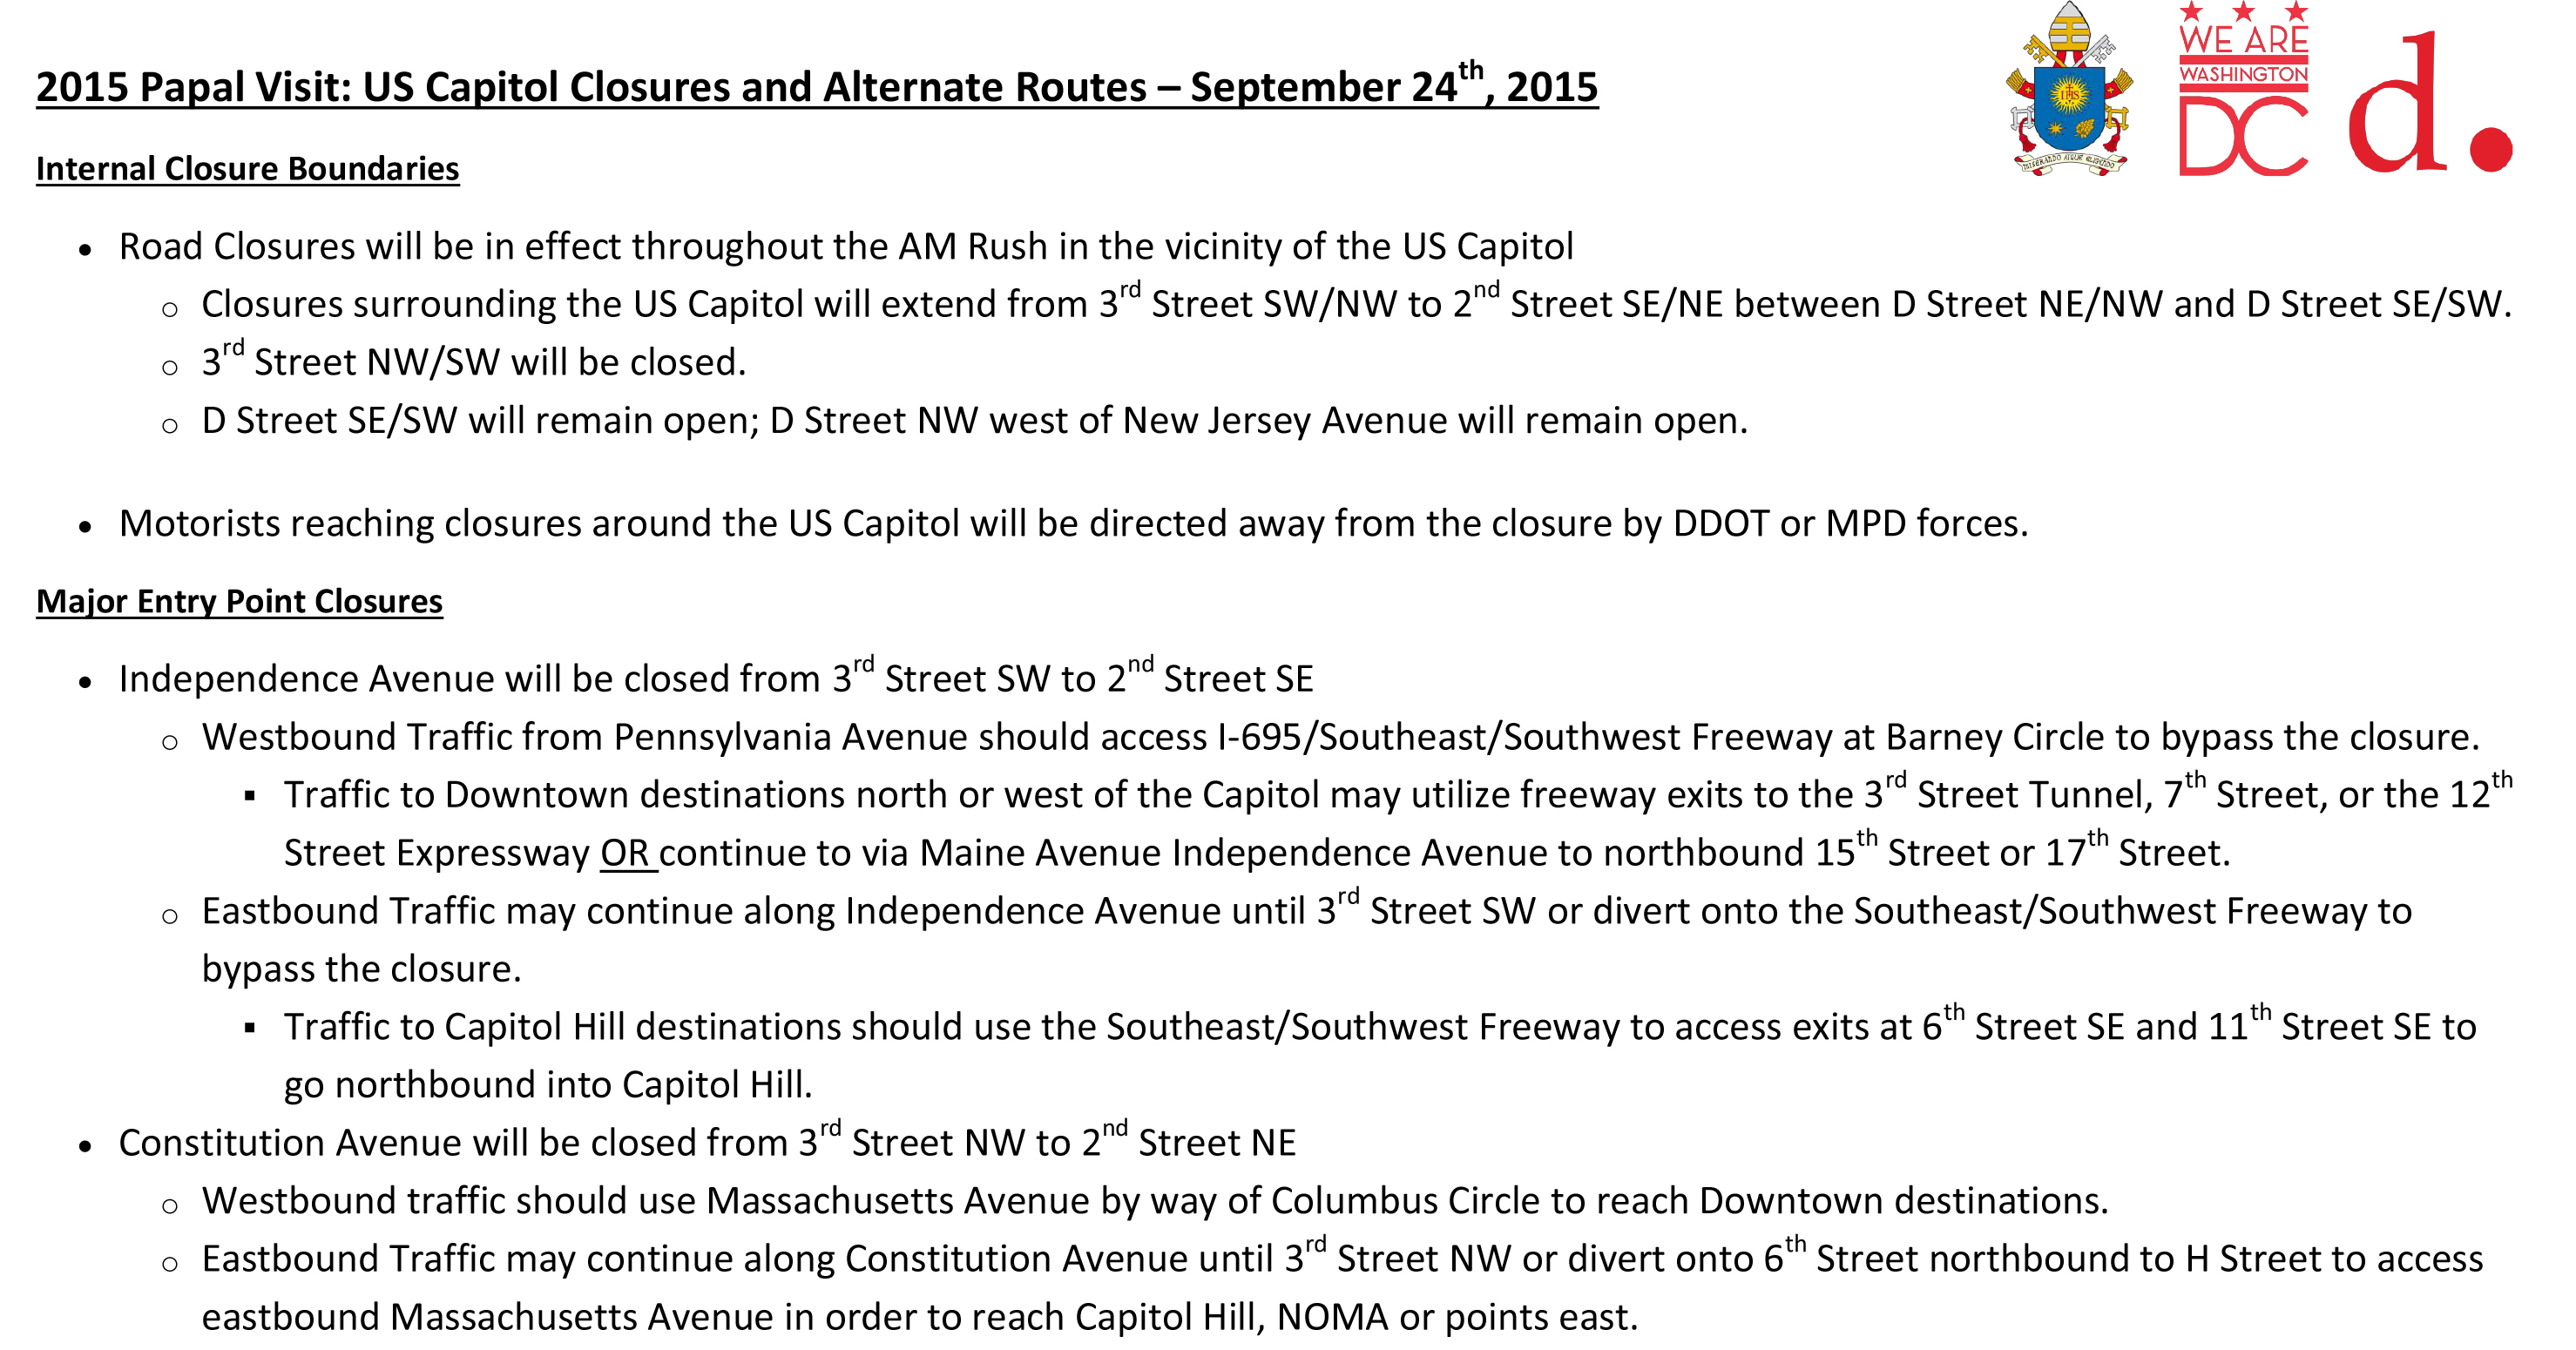 Preview of “2015 Papal Visit Capitol Closures and Alt Routes.p